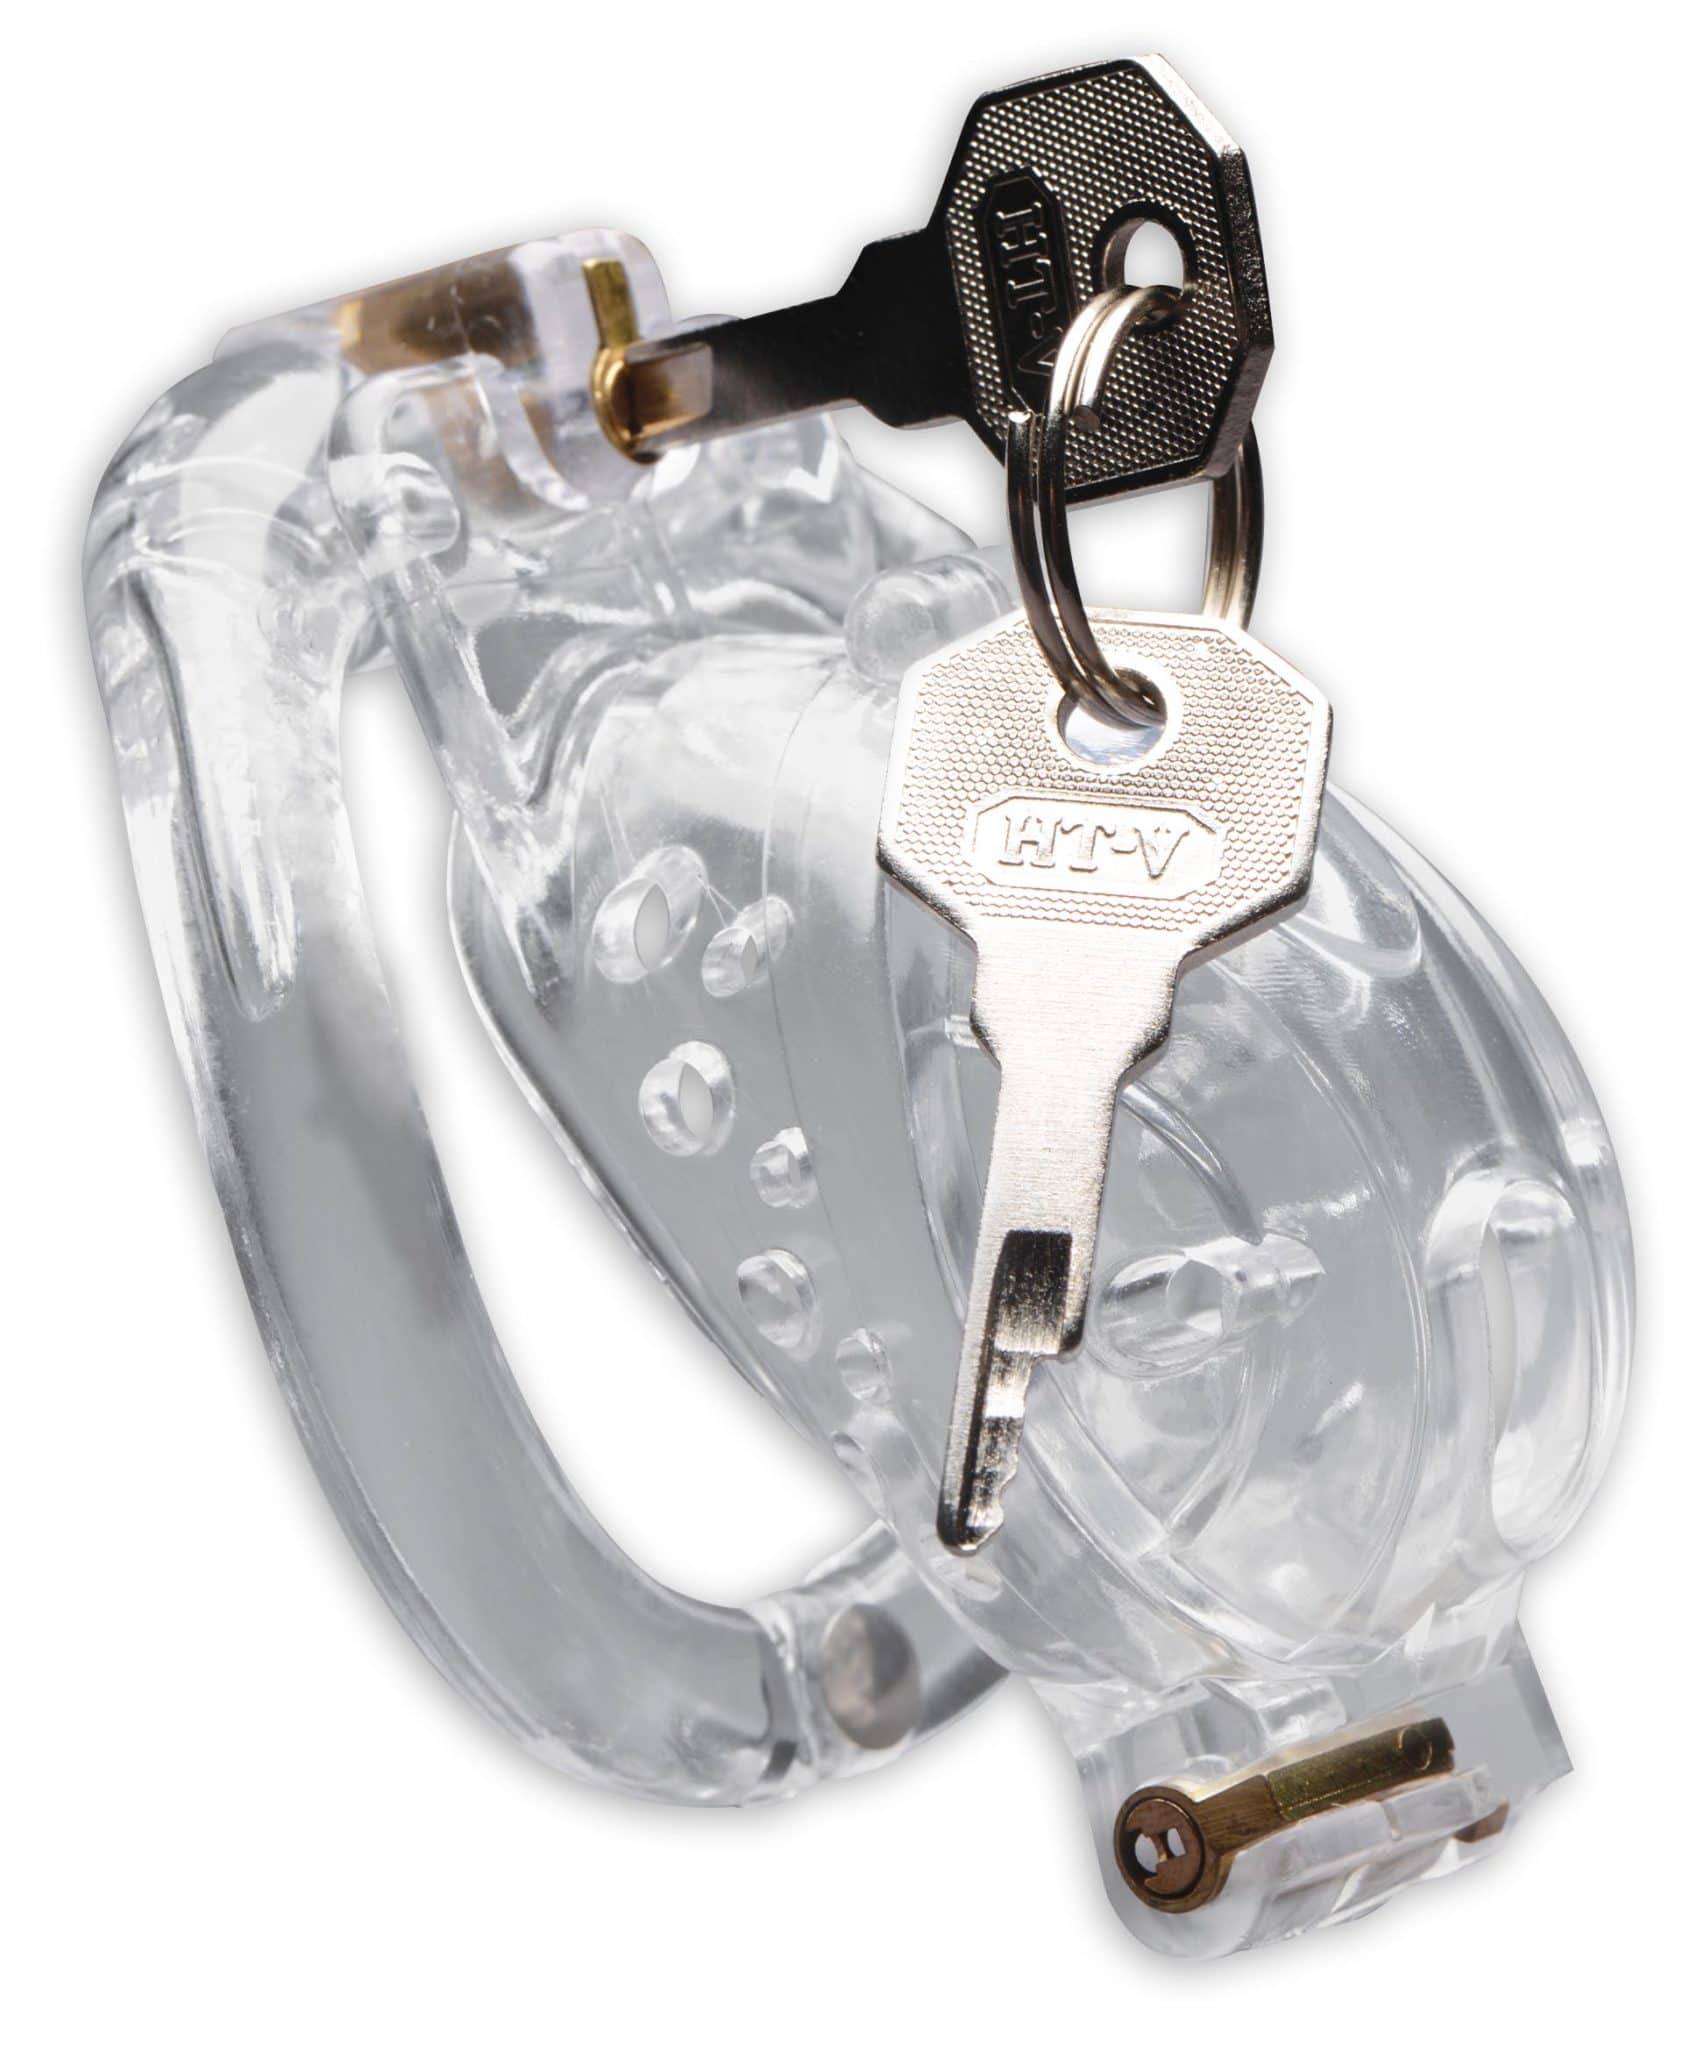 Lockdown Customizable Chastity Cage – Clear